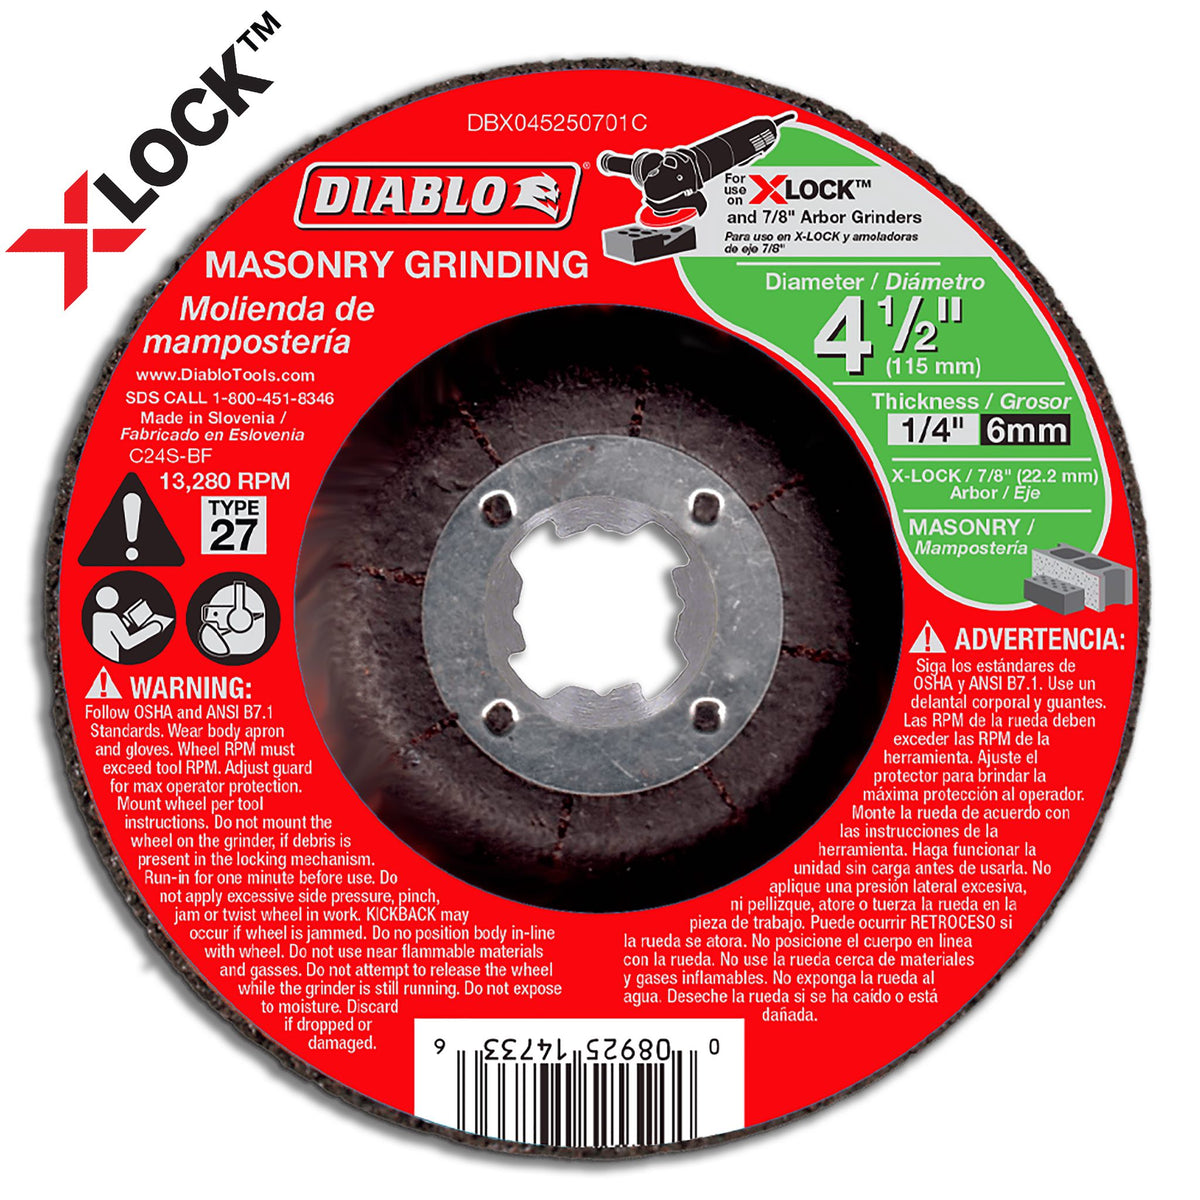 Diablo Masonry Grinding Disc for X-Lock and All Grinders